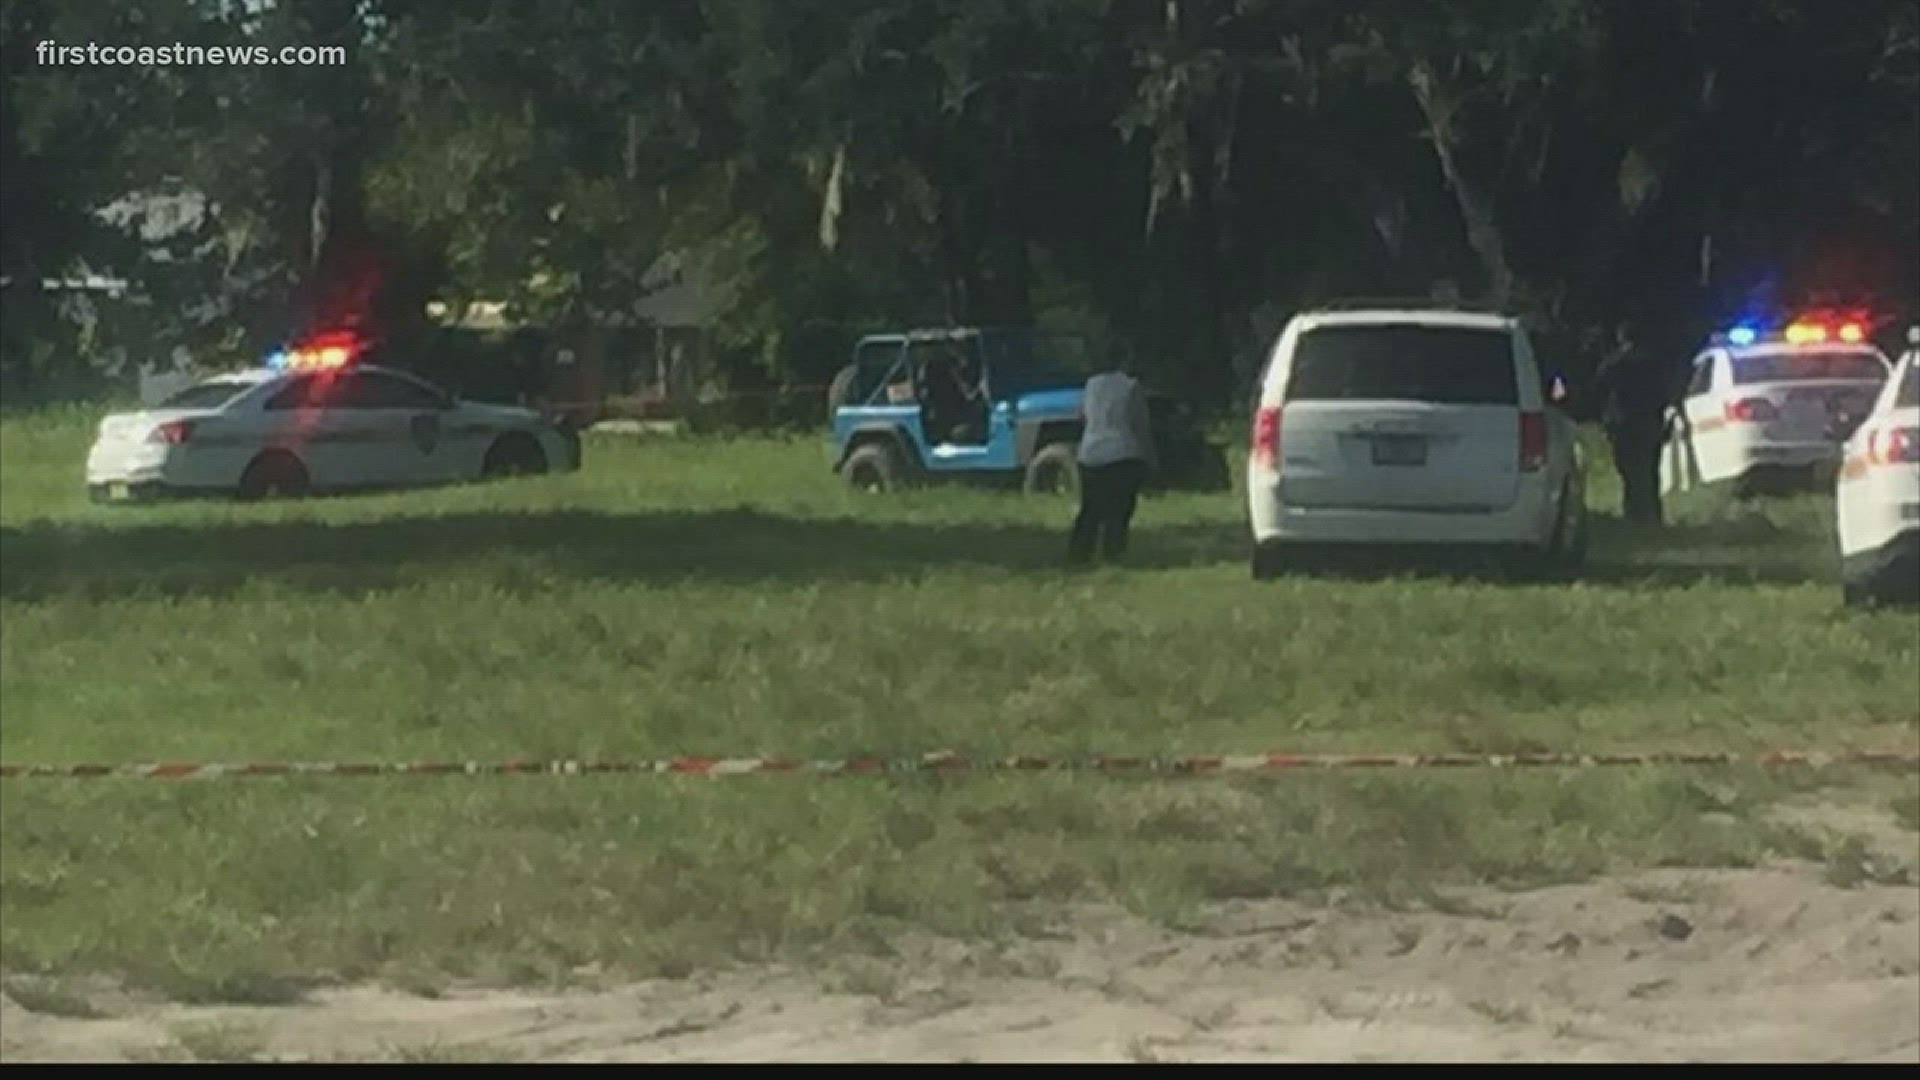 A bicyclist was killed Friday afternoon after he was struck by a vehicle, and a driver died early this morning after his Jeep flipped in a grassy area.